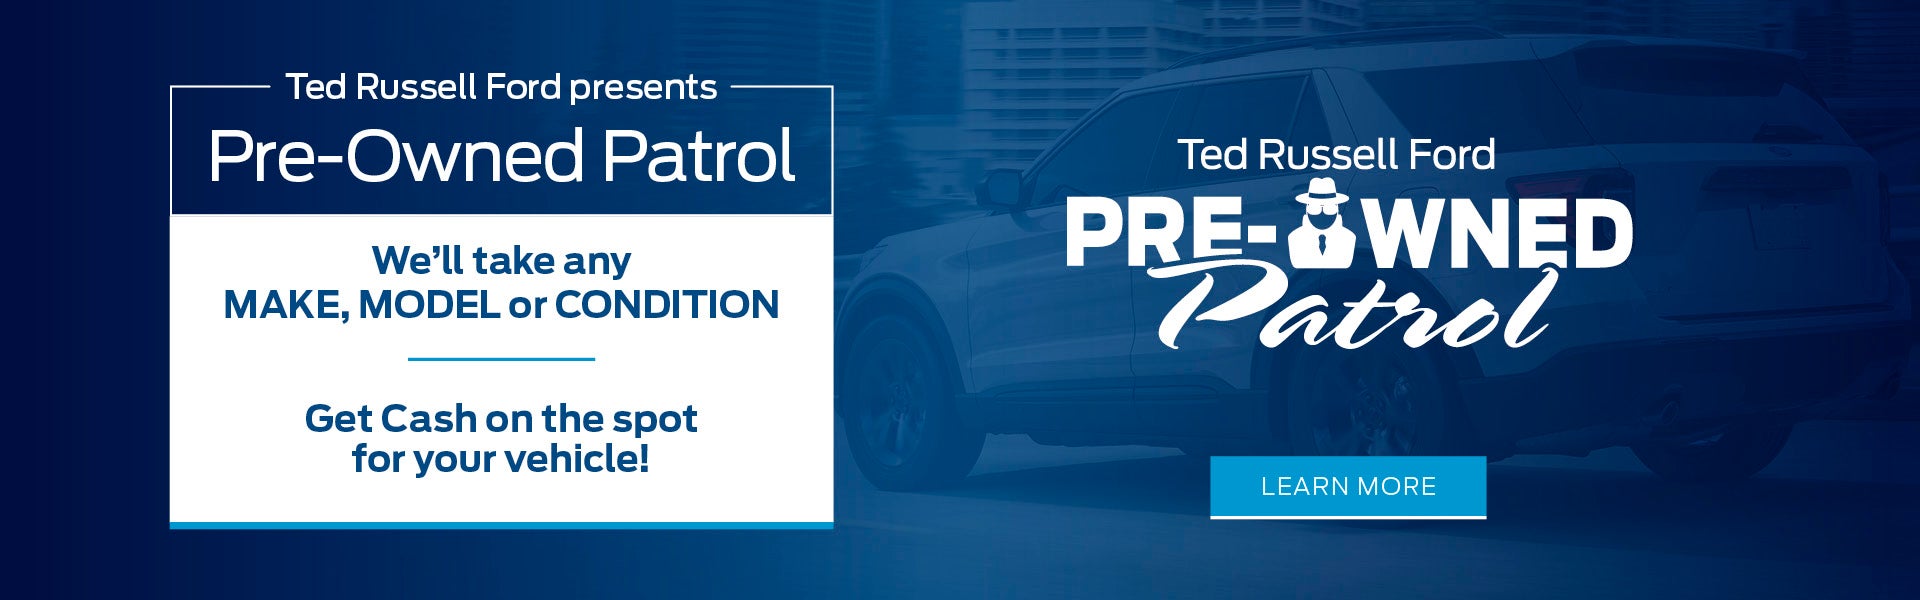 Ted Russell Ford Pre-Owned Patrol